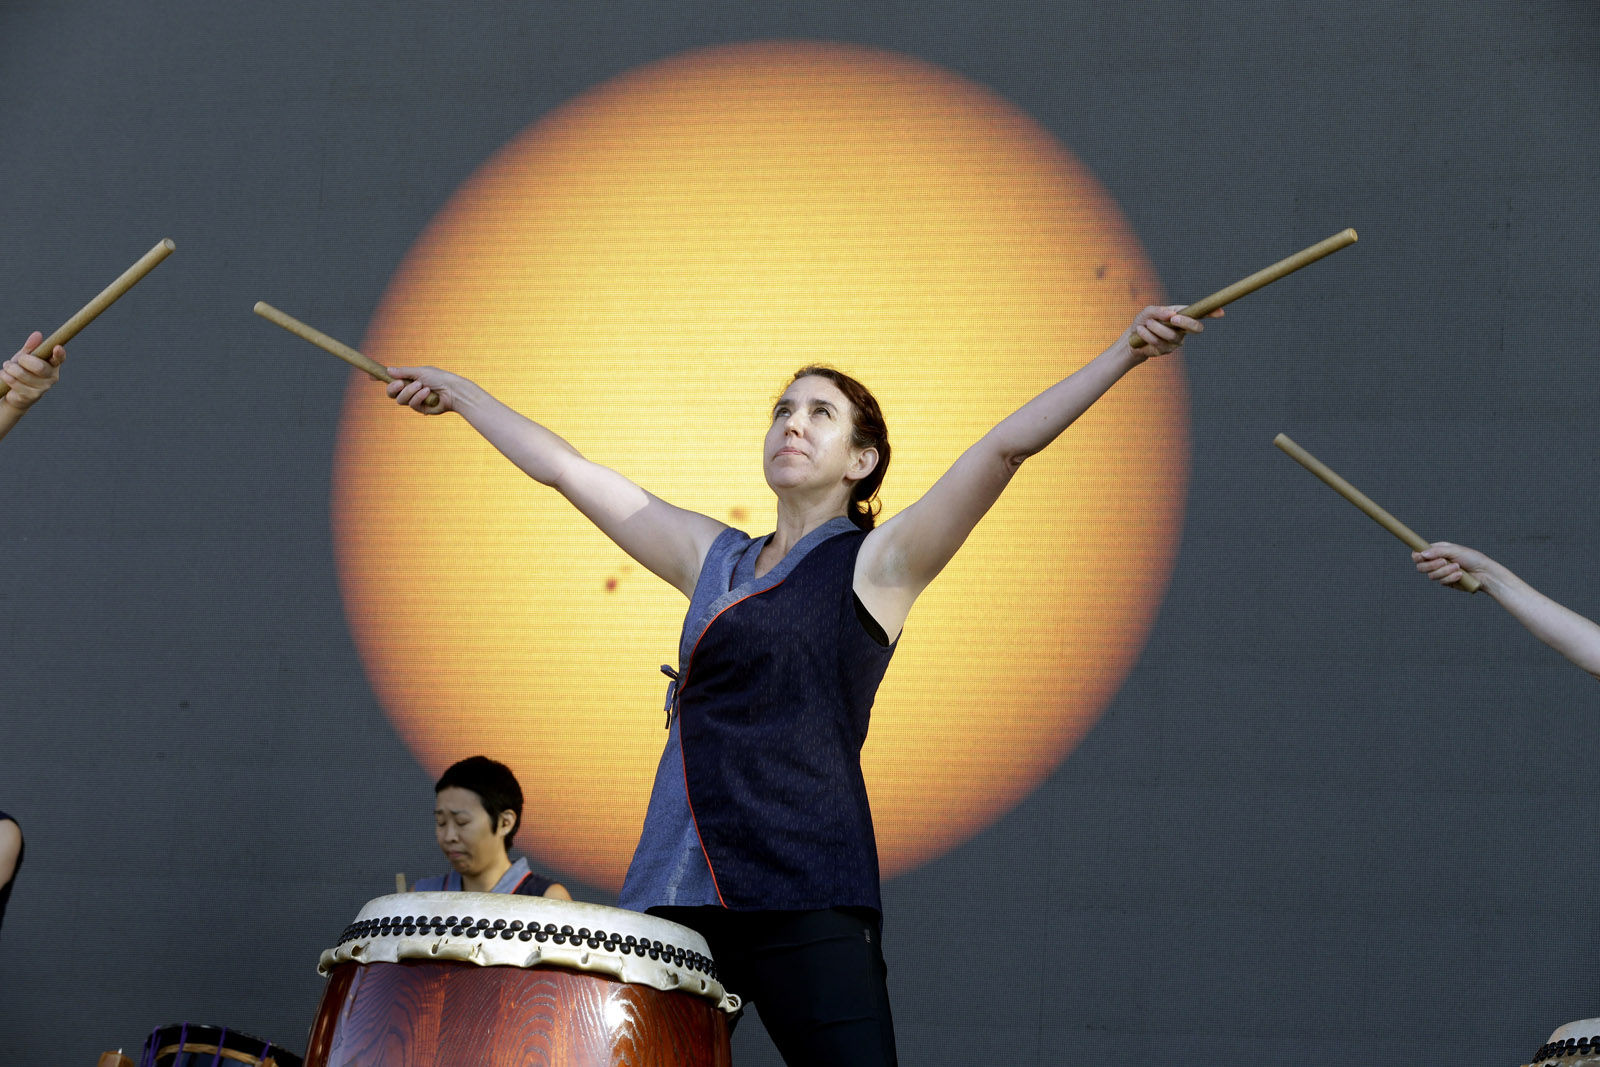 Portland Taiko drummer Karen Tingey performs in front of a live video shot of the sun to introduce the solar eclipse from Salem, Ore., Monday, Aug. 21, 2017. (AP Photo/Don Ryan)